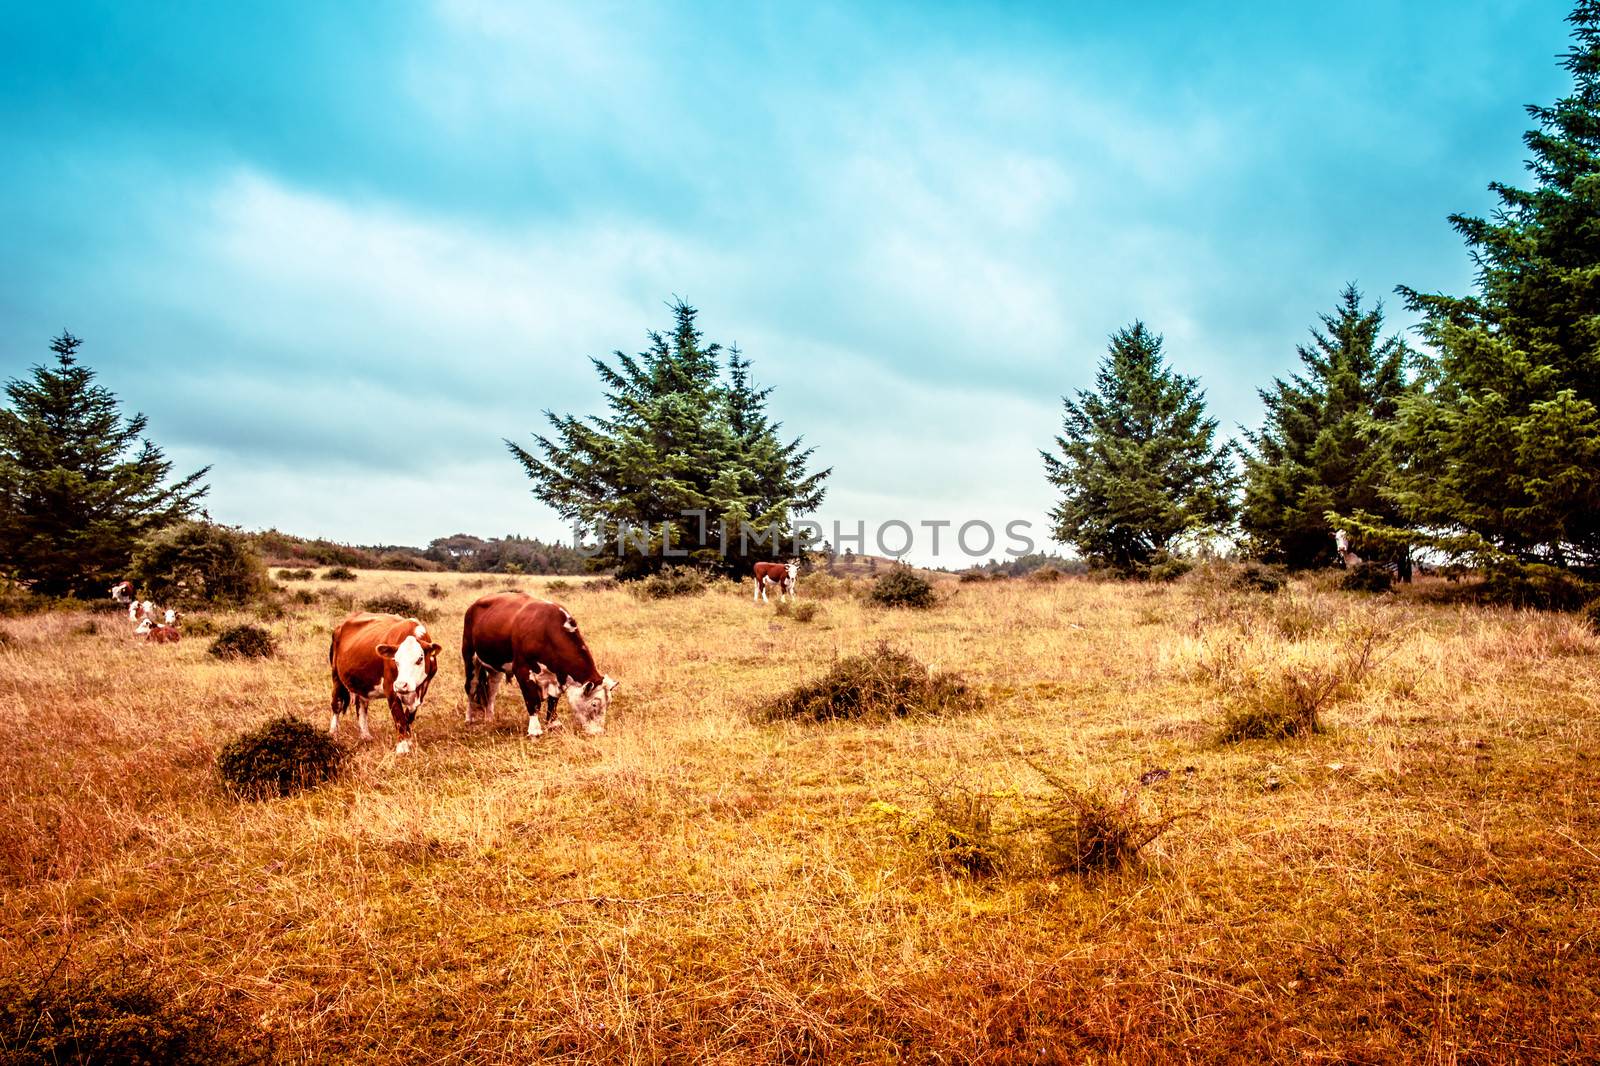 Hereford cattle by Sportactive